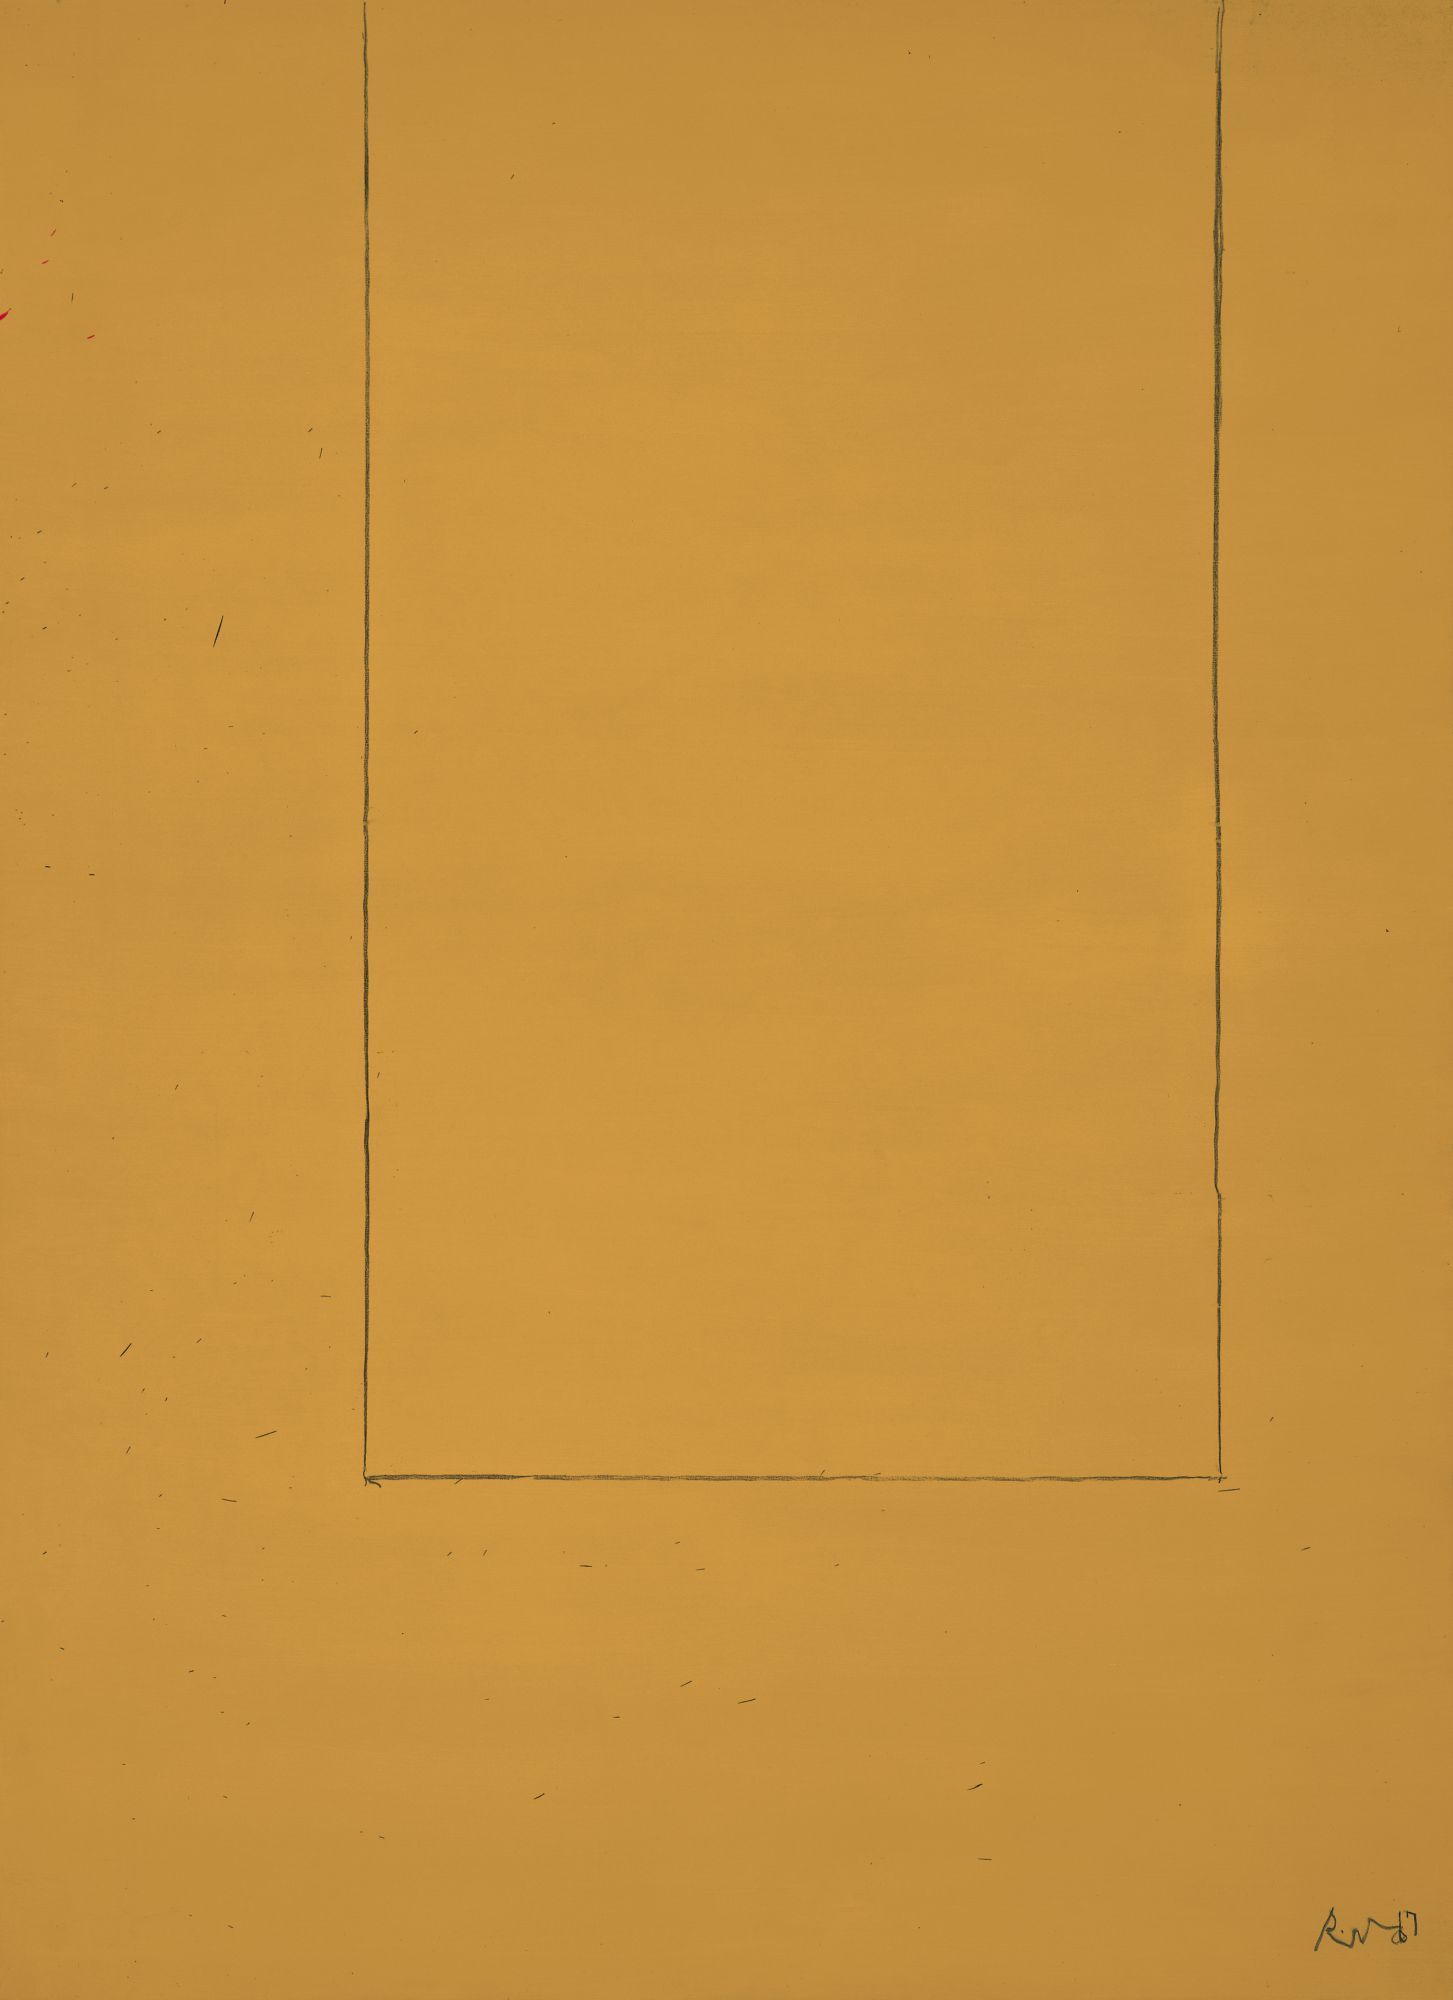 Open No. 1: In Yellow Ochre, 1967. Acrylic and charcoal on canvas, 114 x 84 inches (289.6 x 213.4 cm)